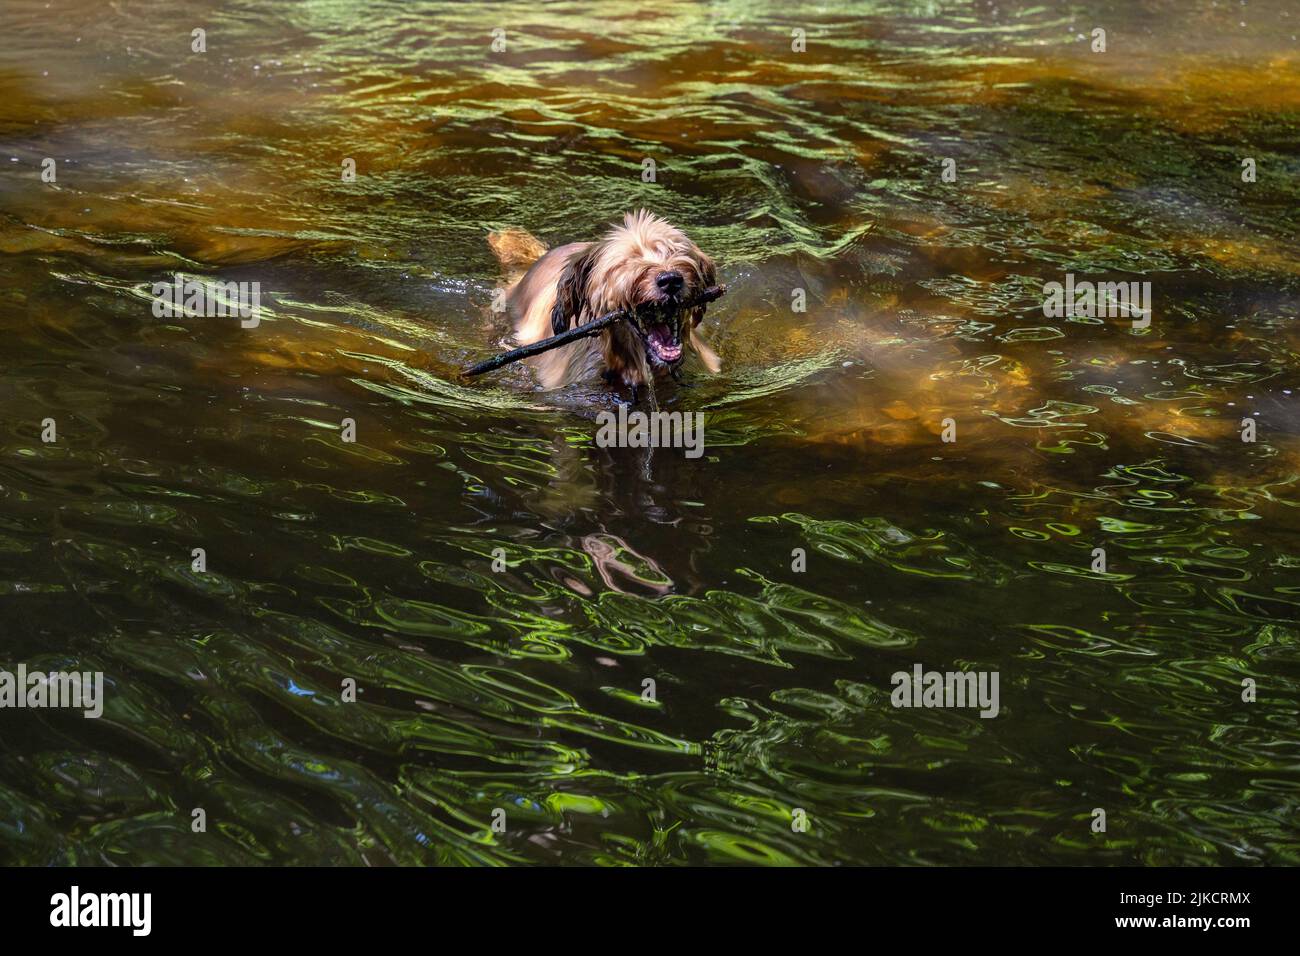 Briard dog swimming in beautifully illuminated river with stick in mouth. Stock Photo